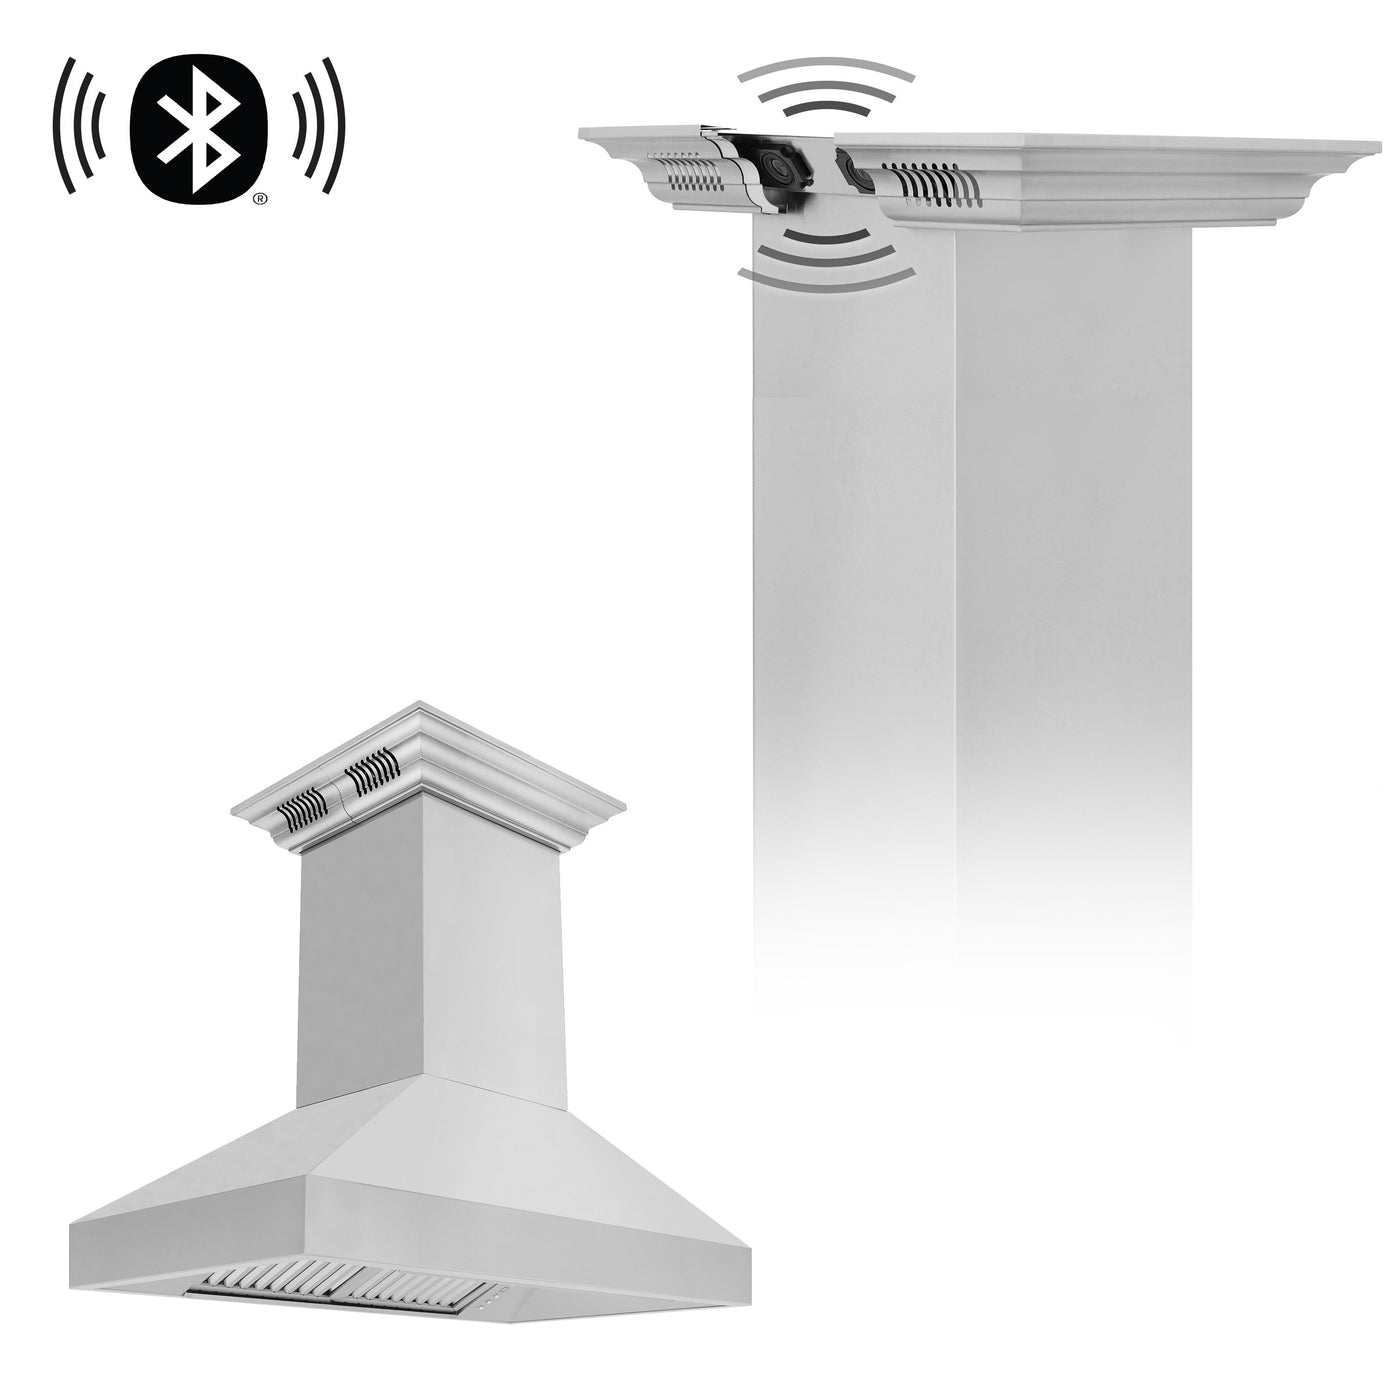 ZLINE Professional Wall Mount Range Hood in Stainless Steel with Built-in CrownSound™ Bluetooth Speakers (597iCRN-BT)